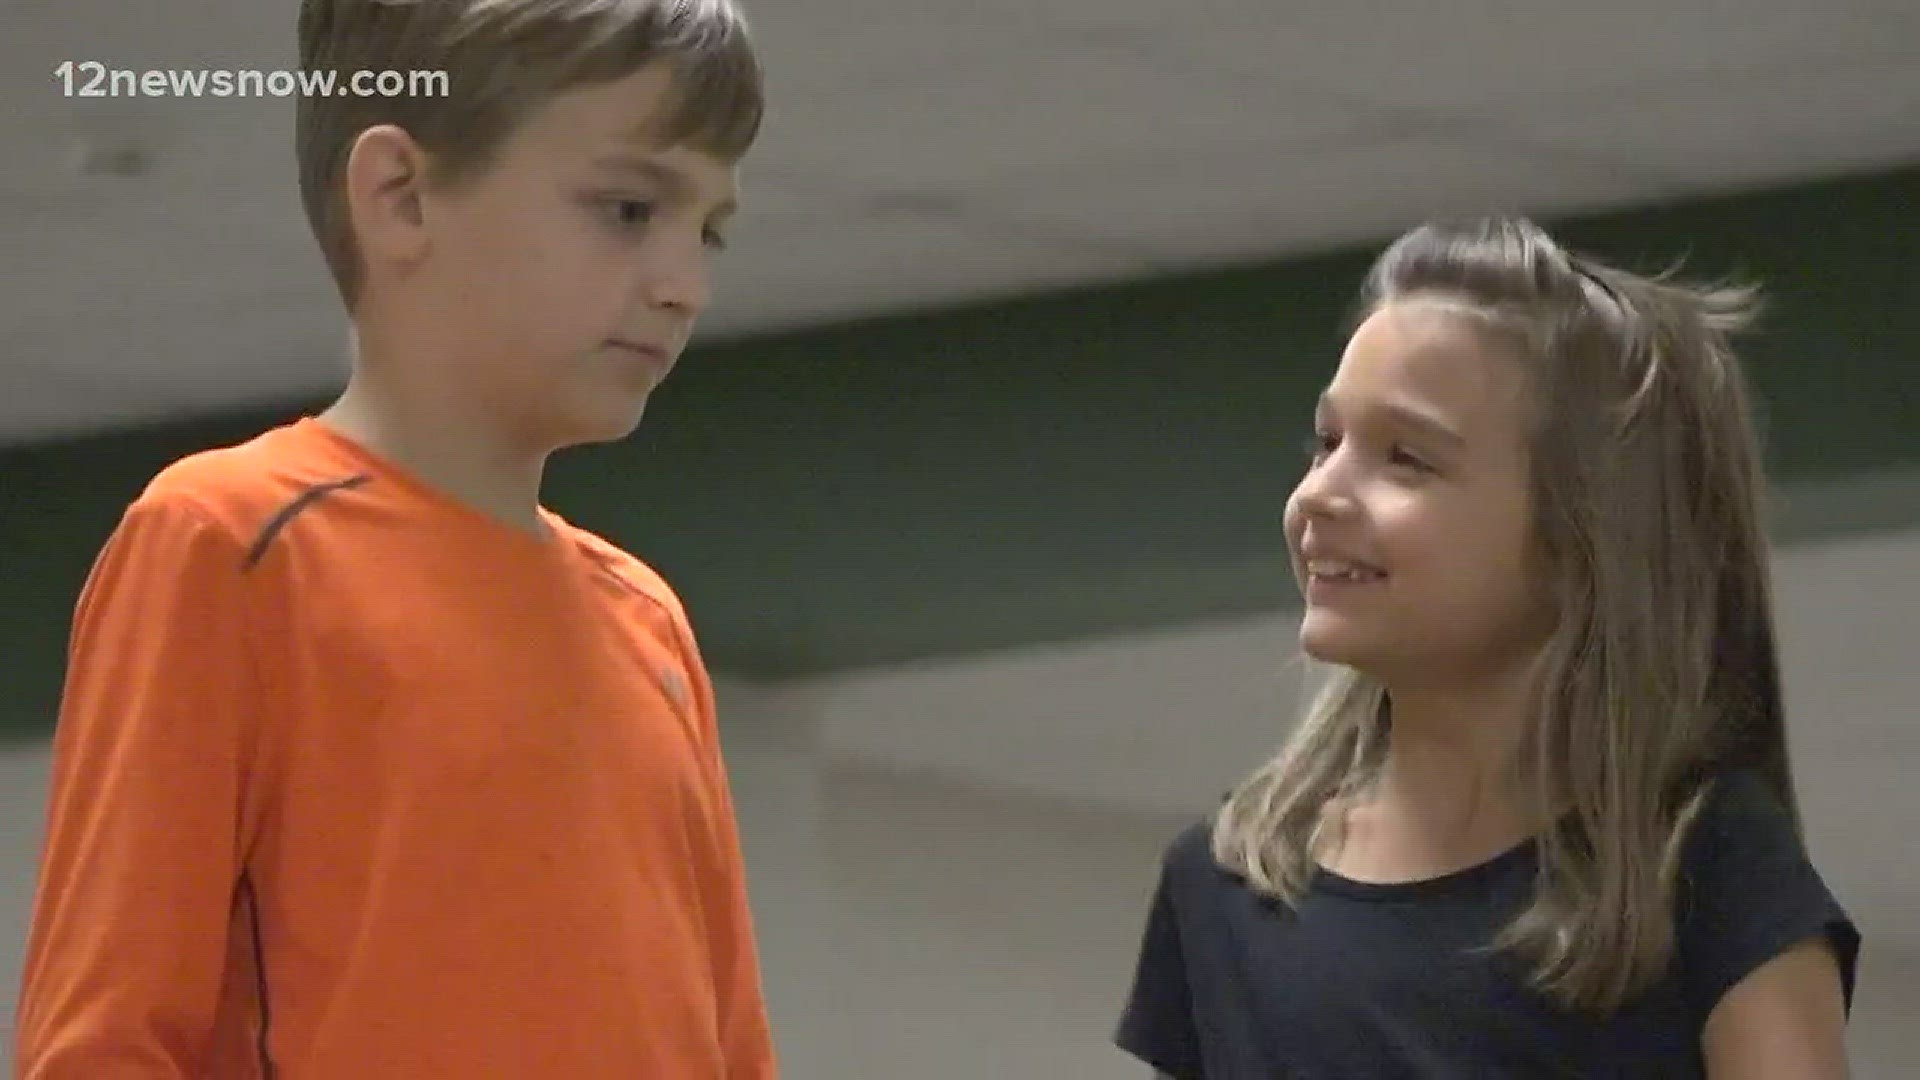 Haden and Sadie Causey are a brother-sister due who raised $250 for their school to help with damages and whatever it needed after it suffered damaged from Harvey.